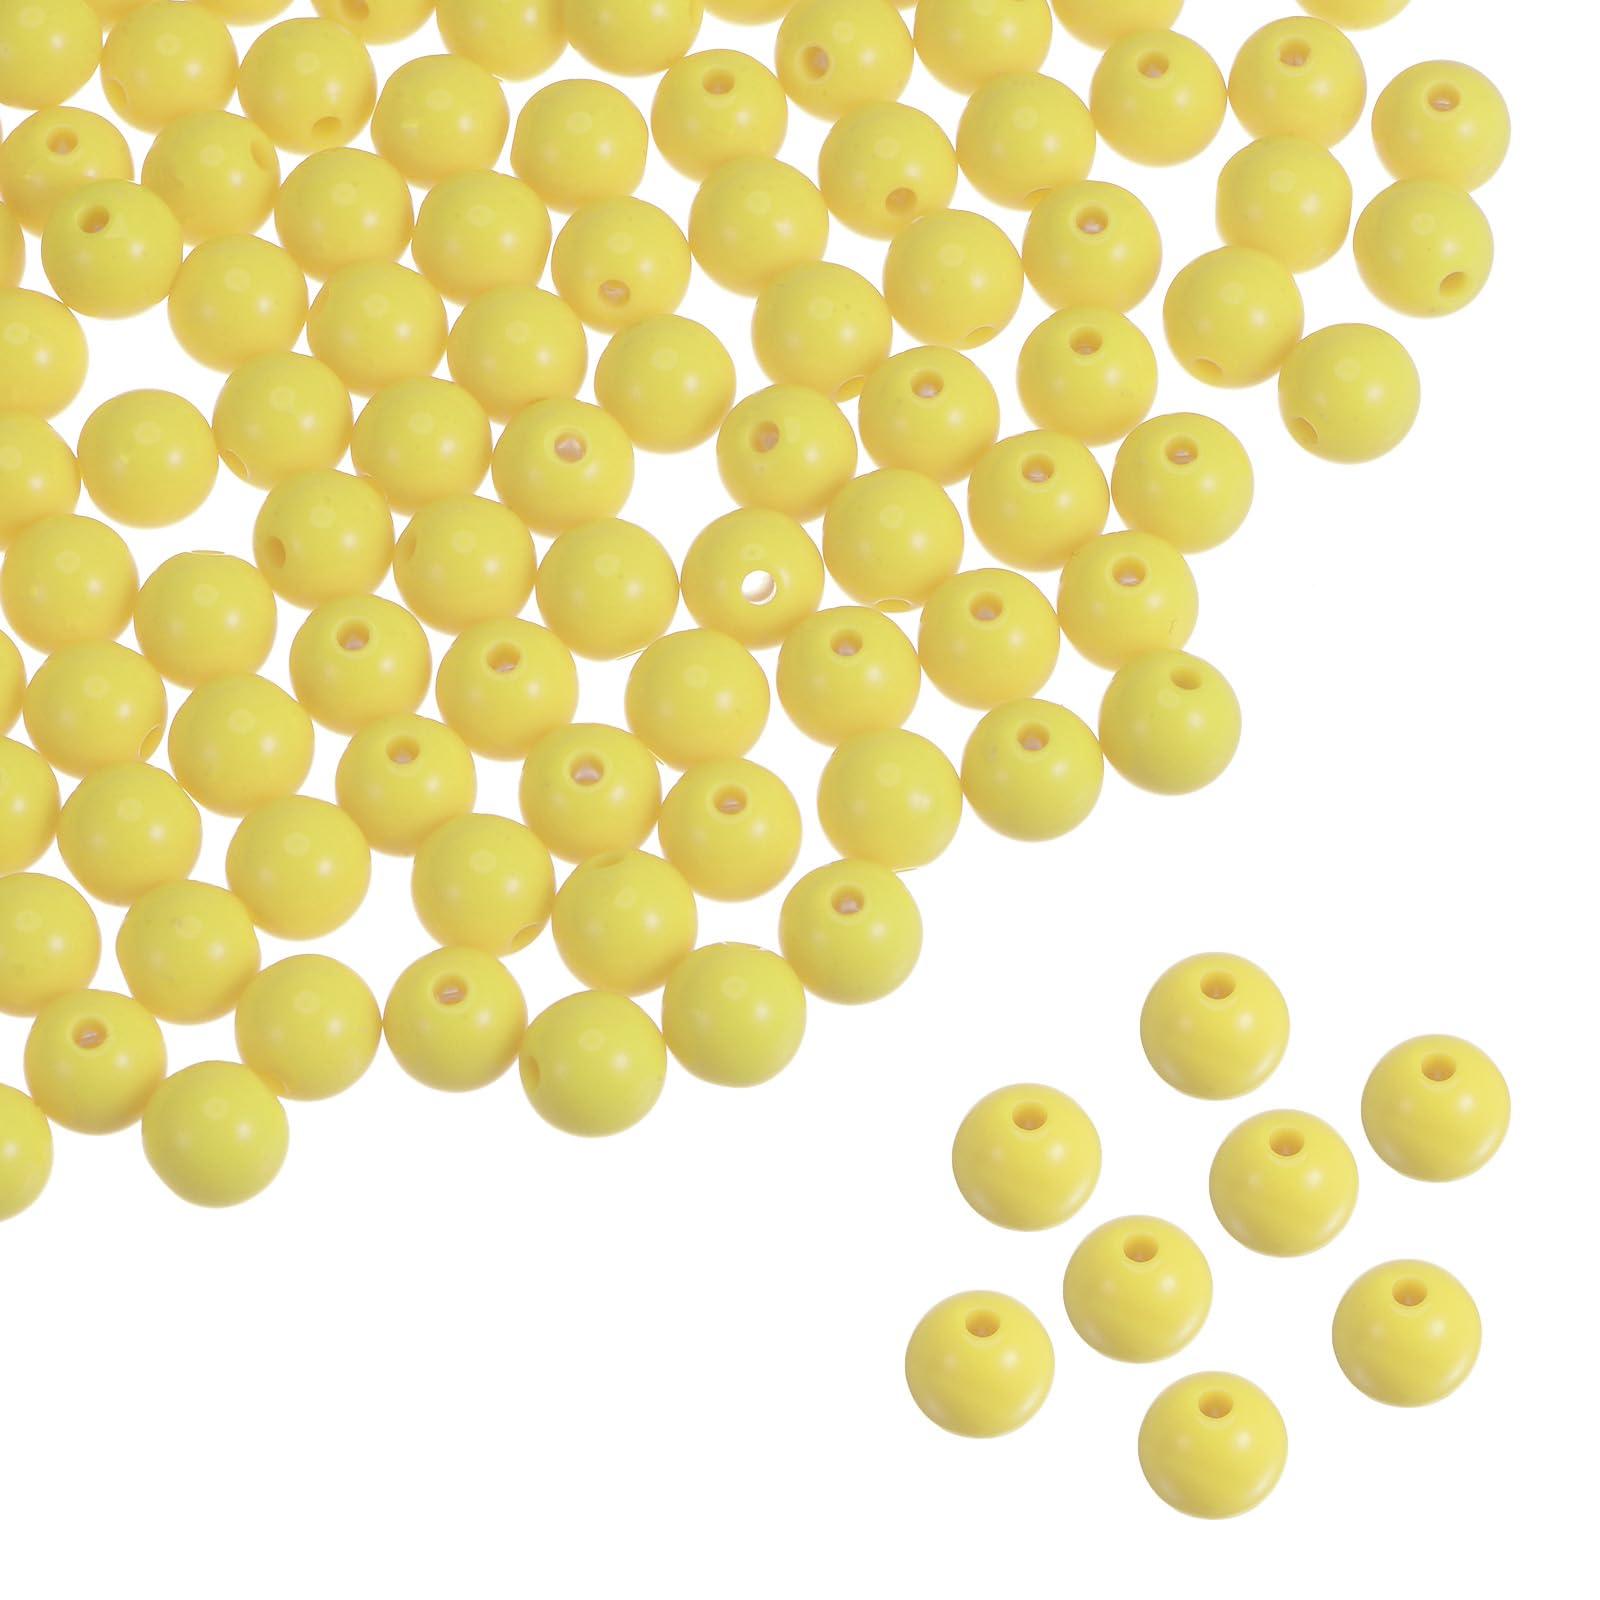 sourcing map 1700pcs Acrylic Round Beads 8mm Loose Bubble Craft Bead Assorted Candy Color for DIY Bracelet Earring Necklace Jewelry Making, Light Yellow